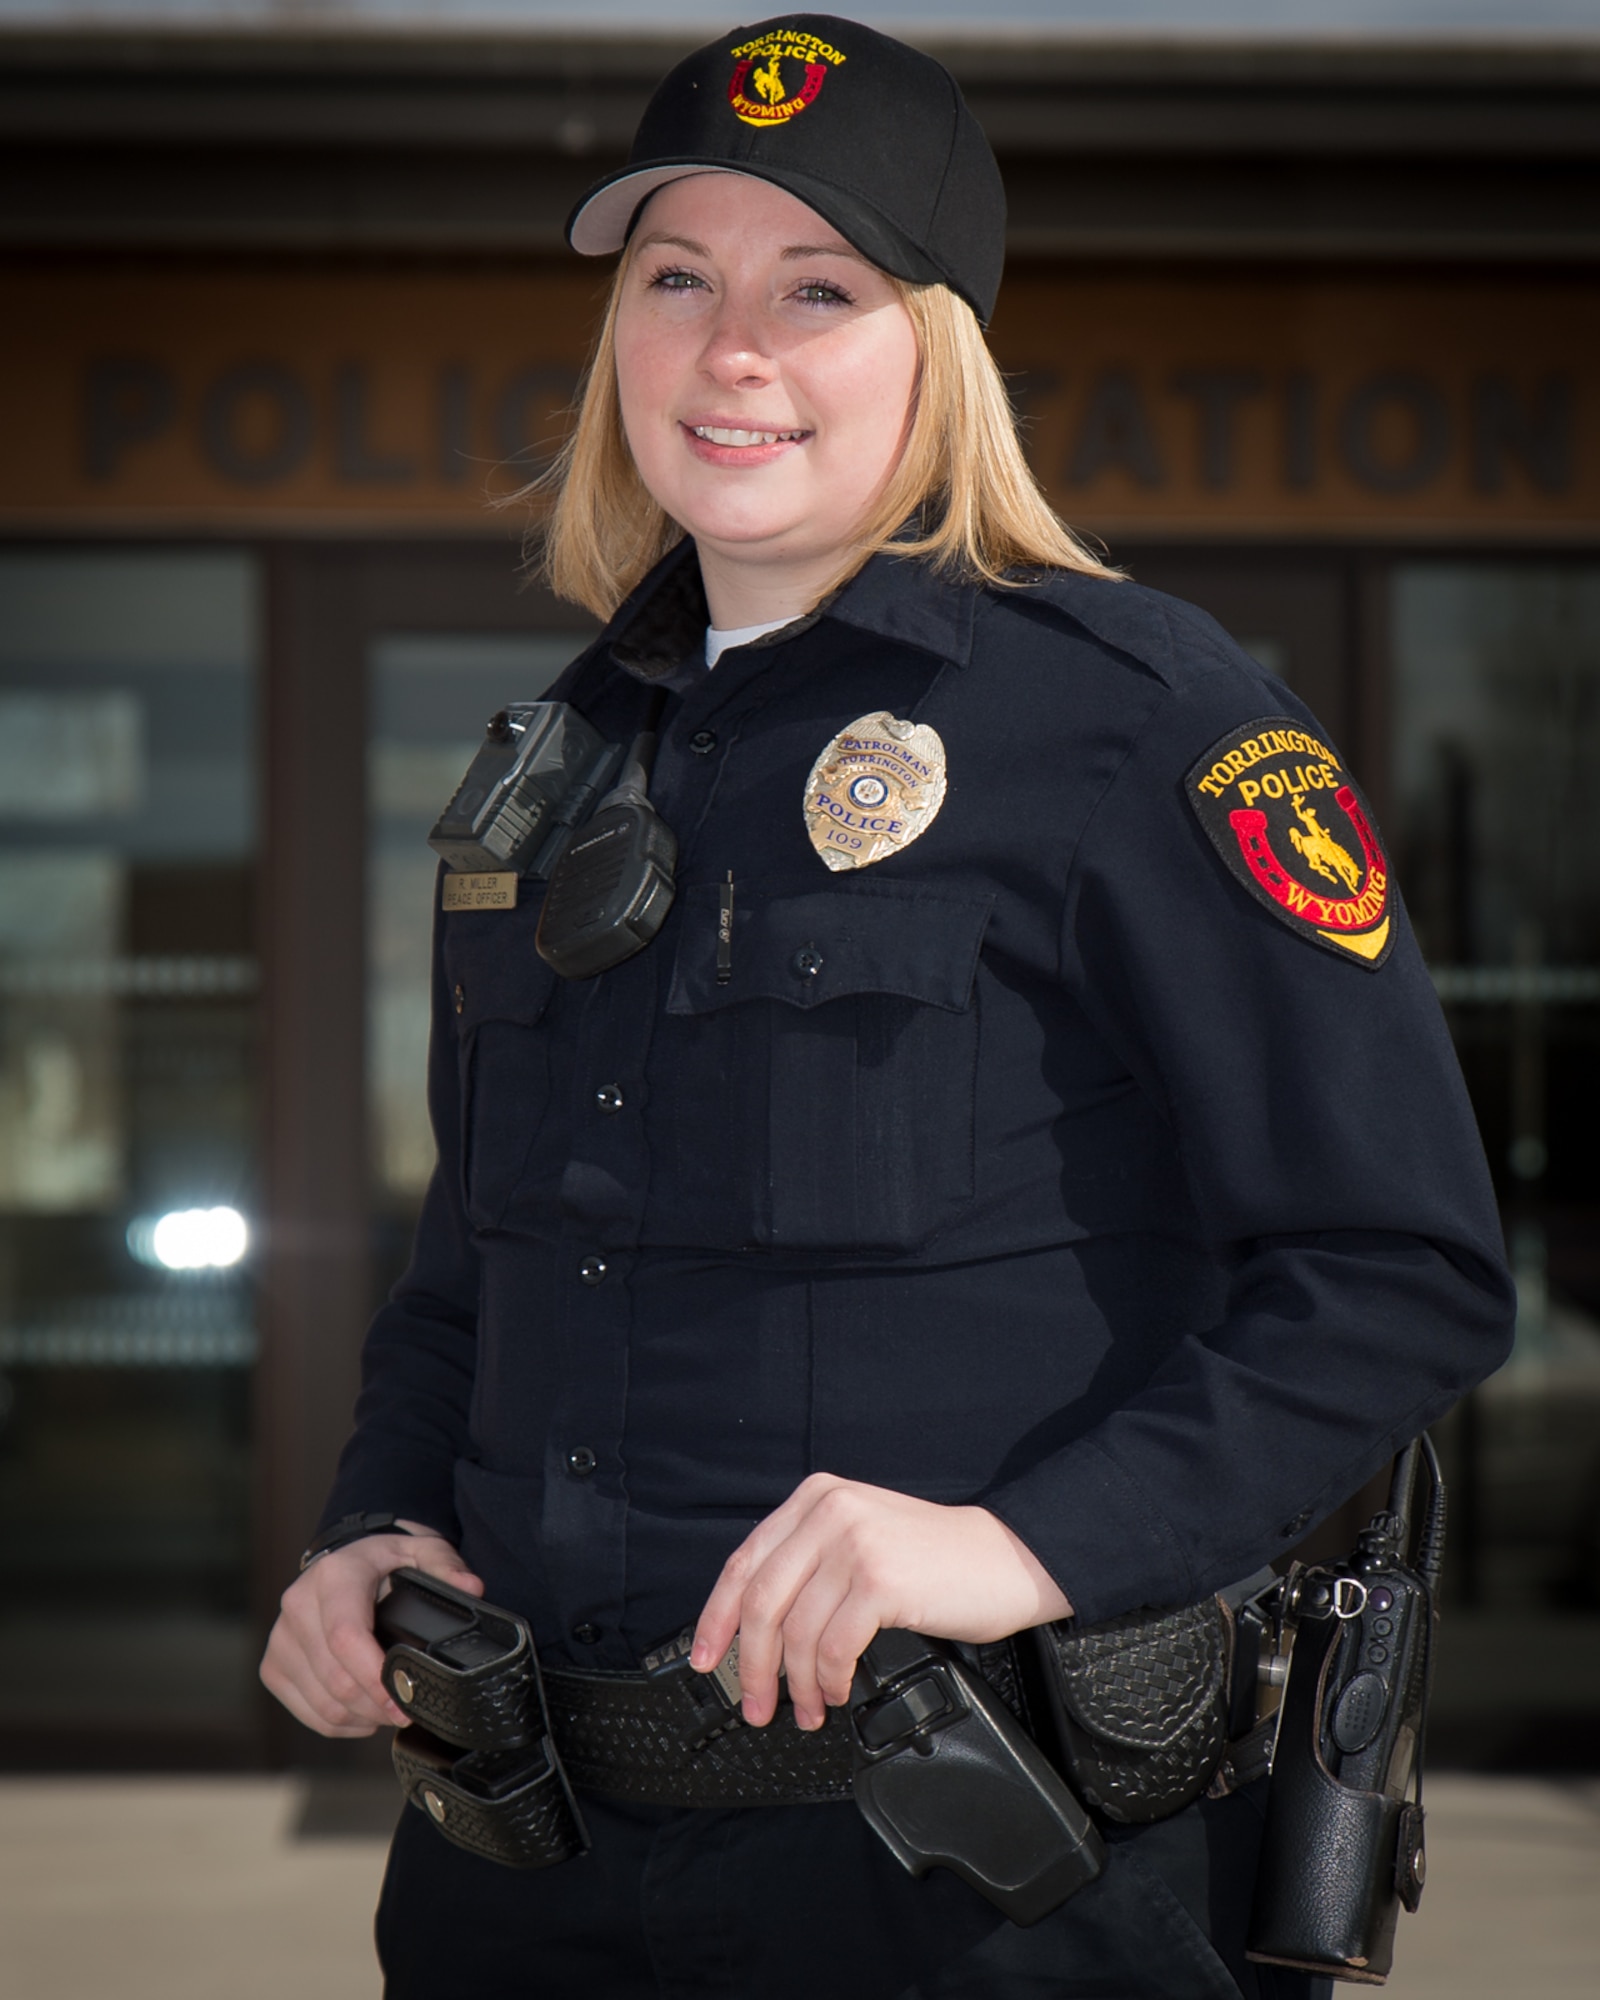 U.S. Air Force Staff Sgt. Rebekah Miller stands in front of the Torrington police department in her police uniform, Mar. 10, 2017 in Torrington, Wyoming. Miller has been with the Wyoming Air National Guard for six years and is serving as a command post specialist. She has also been an officer with the Torrington police department for two years. (U.S. Air National Guard photo by Senior Master Sgt. Charles Delano/released)